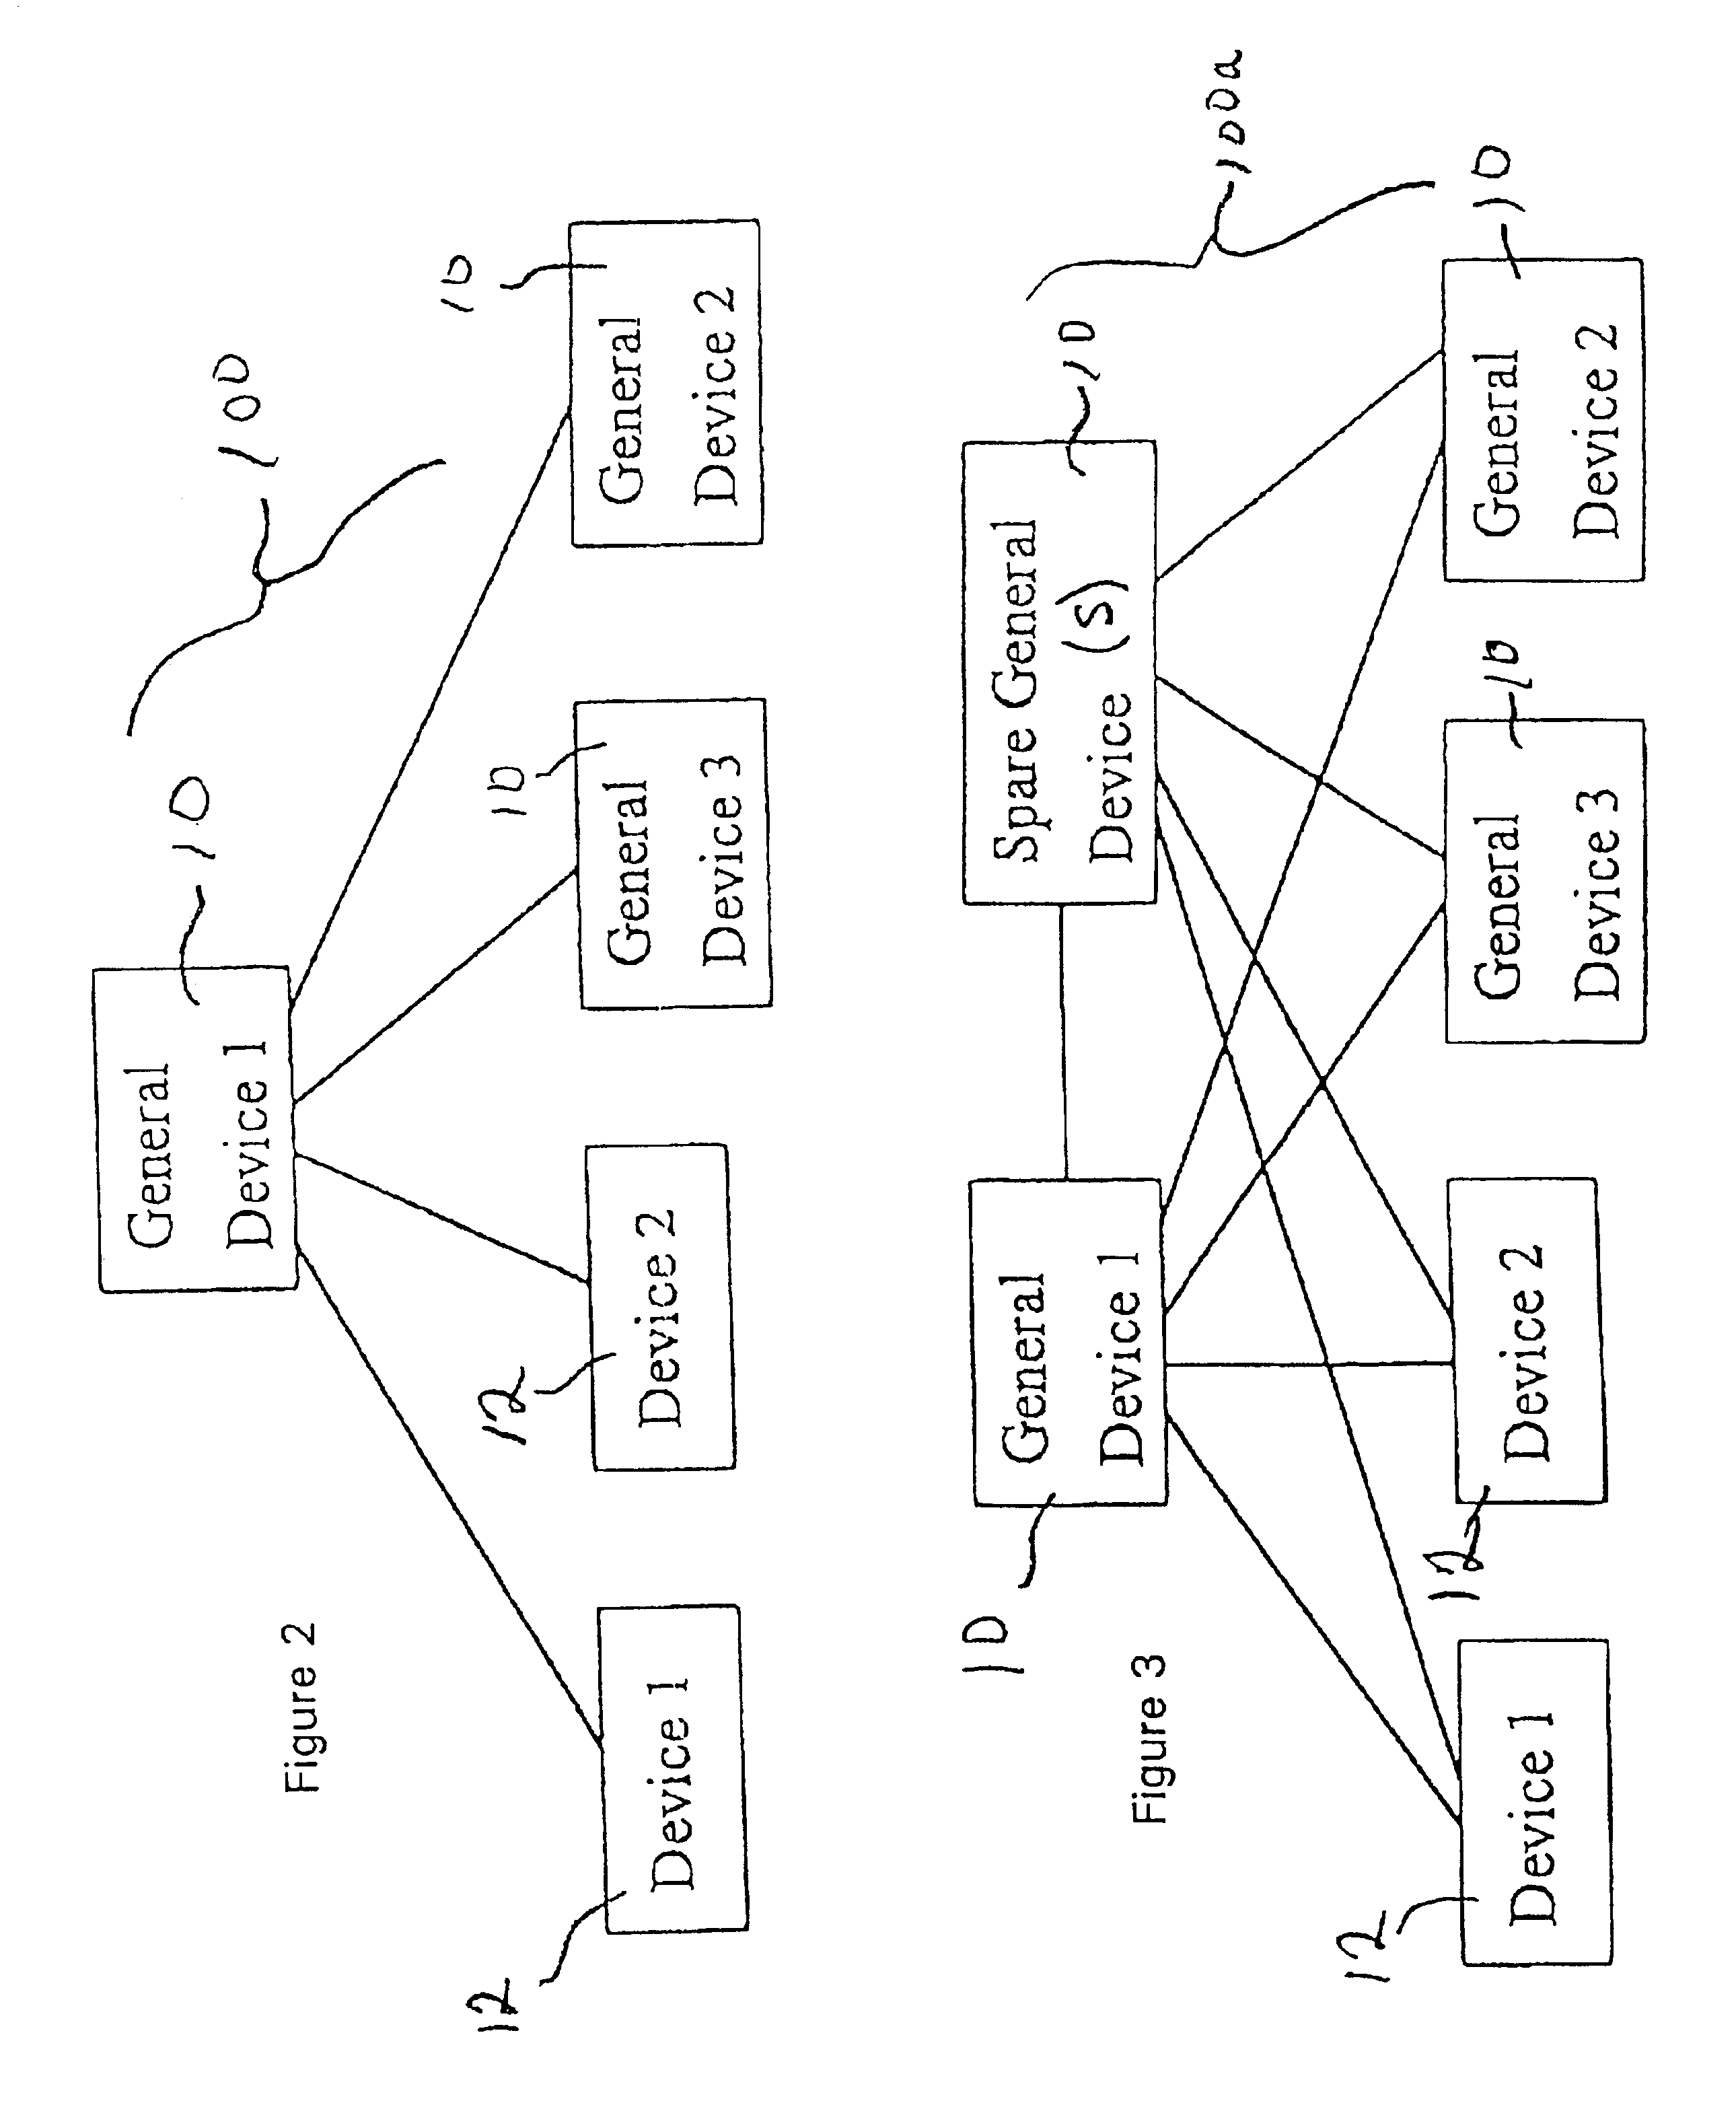 Expandable object tracking system and devices